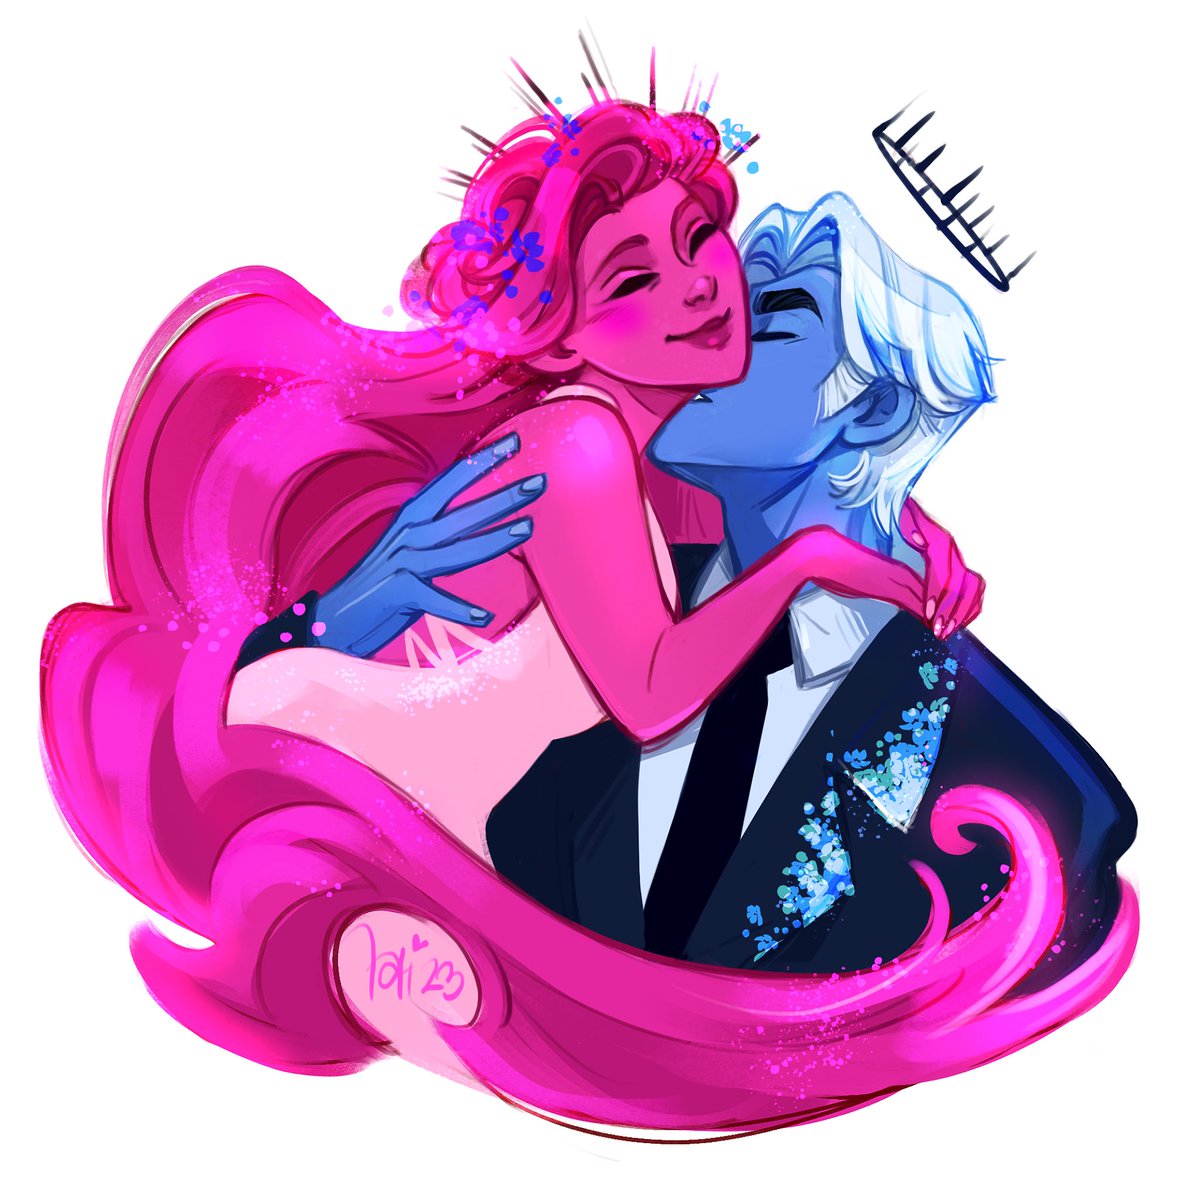 King & Queen of the Underworld doodle to warm up your day 👑💖💙
.
Lore Olympus belongs to @used_bandaid 
.
#loreolympus #loreolympusfanart #webtoon